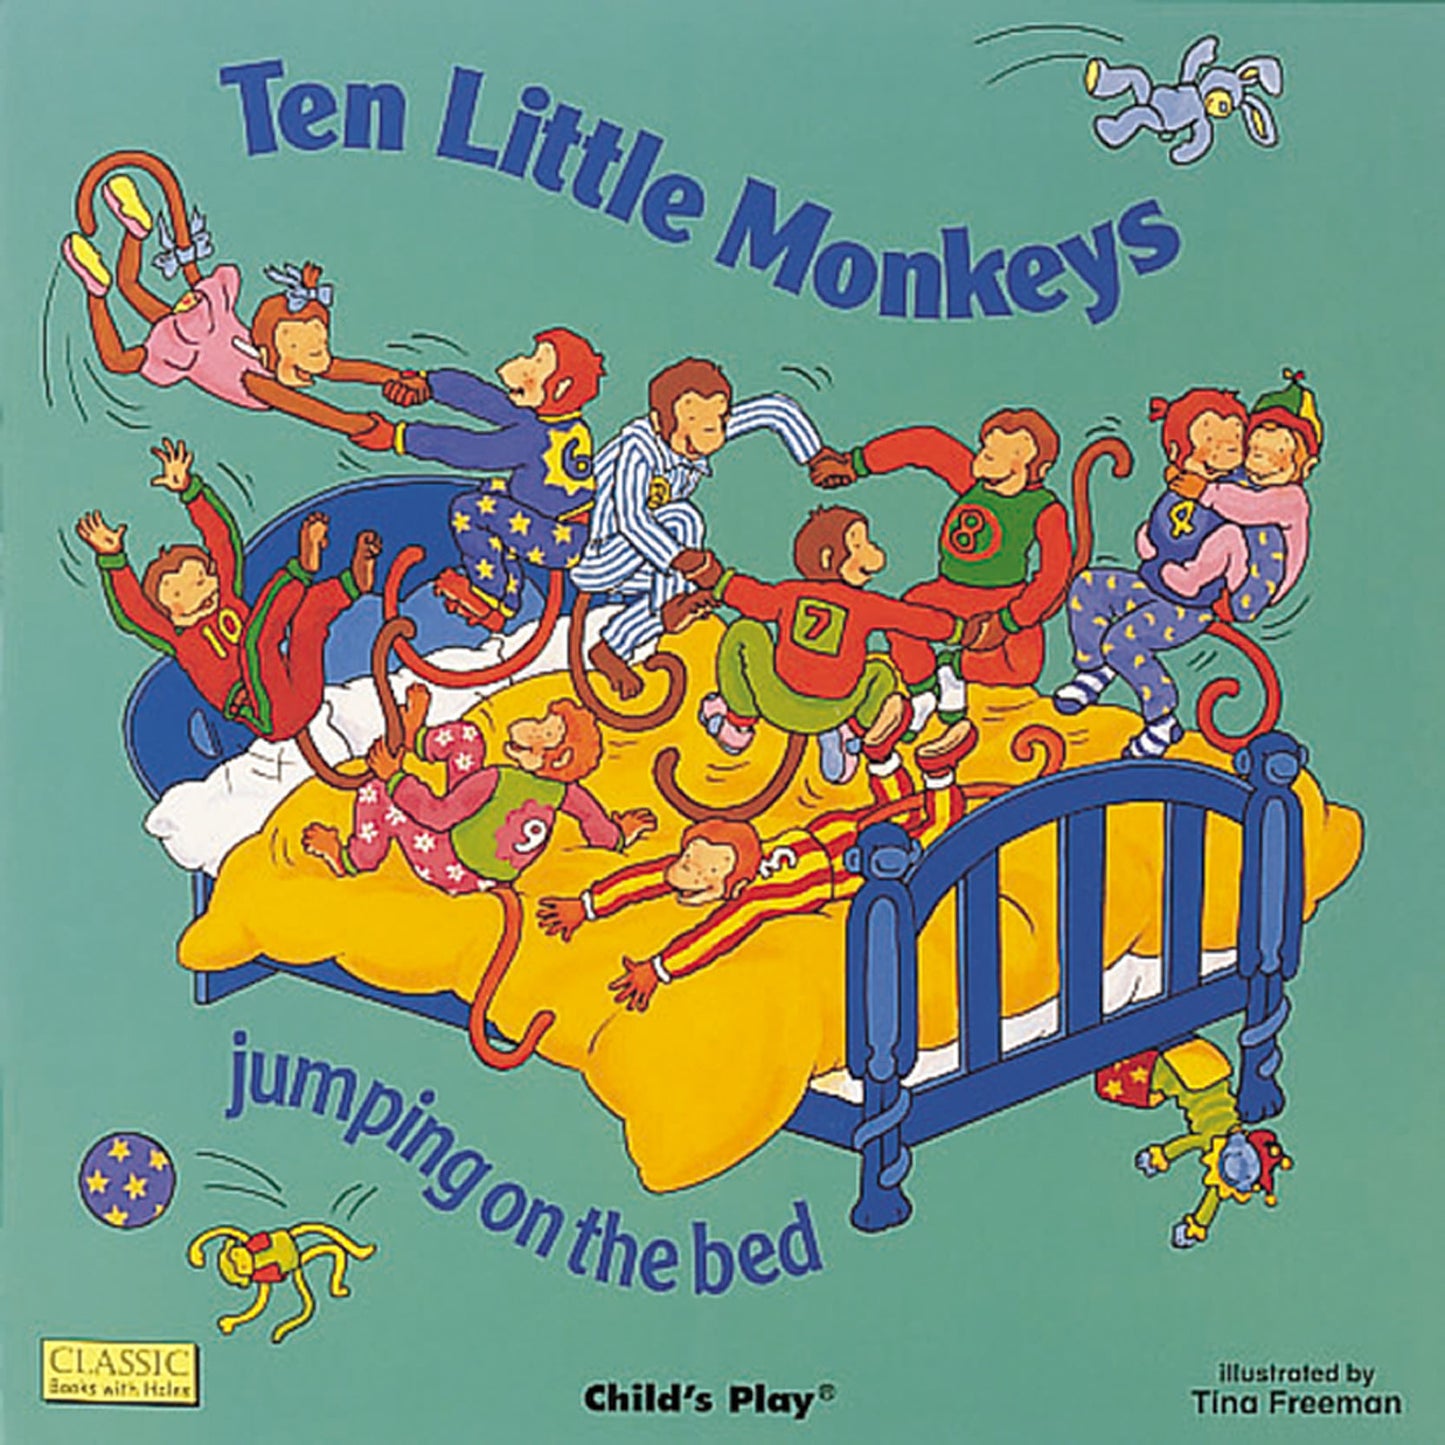 Ten Little Monkeys Jumping on the Bed (Big Book Edition)